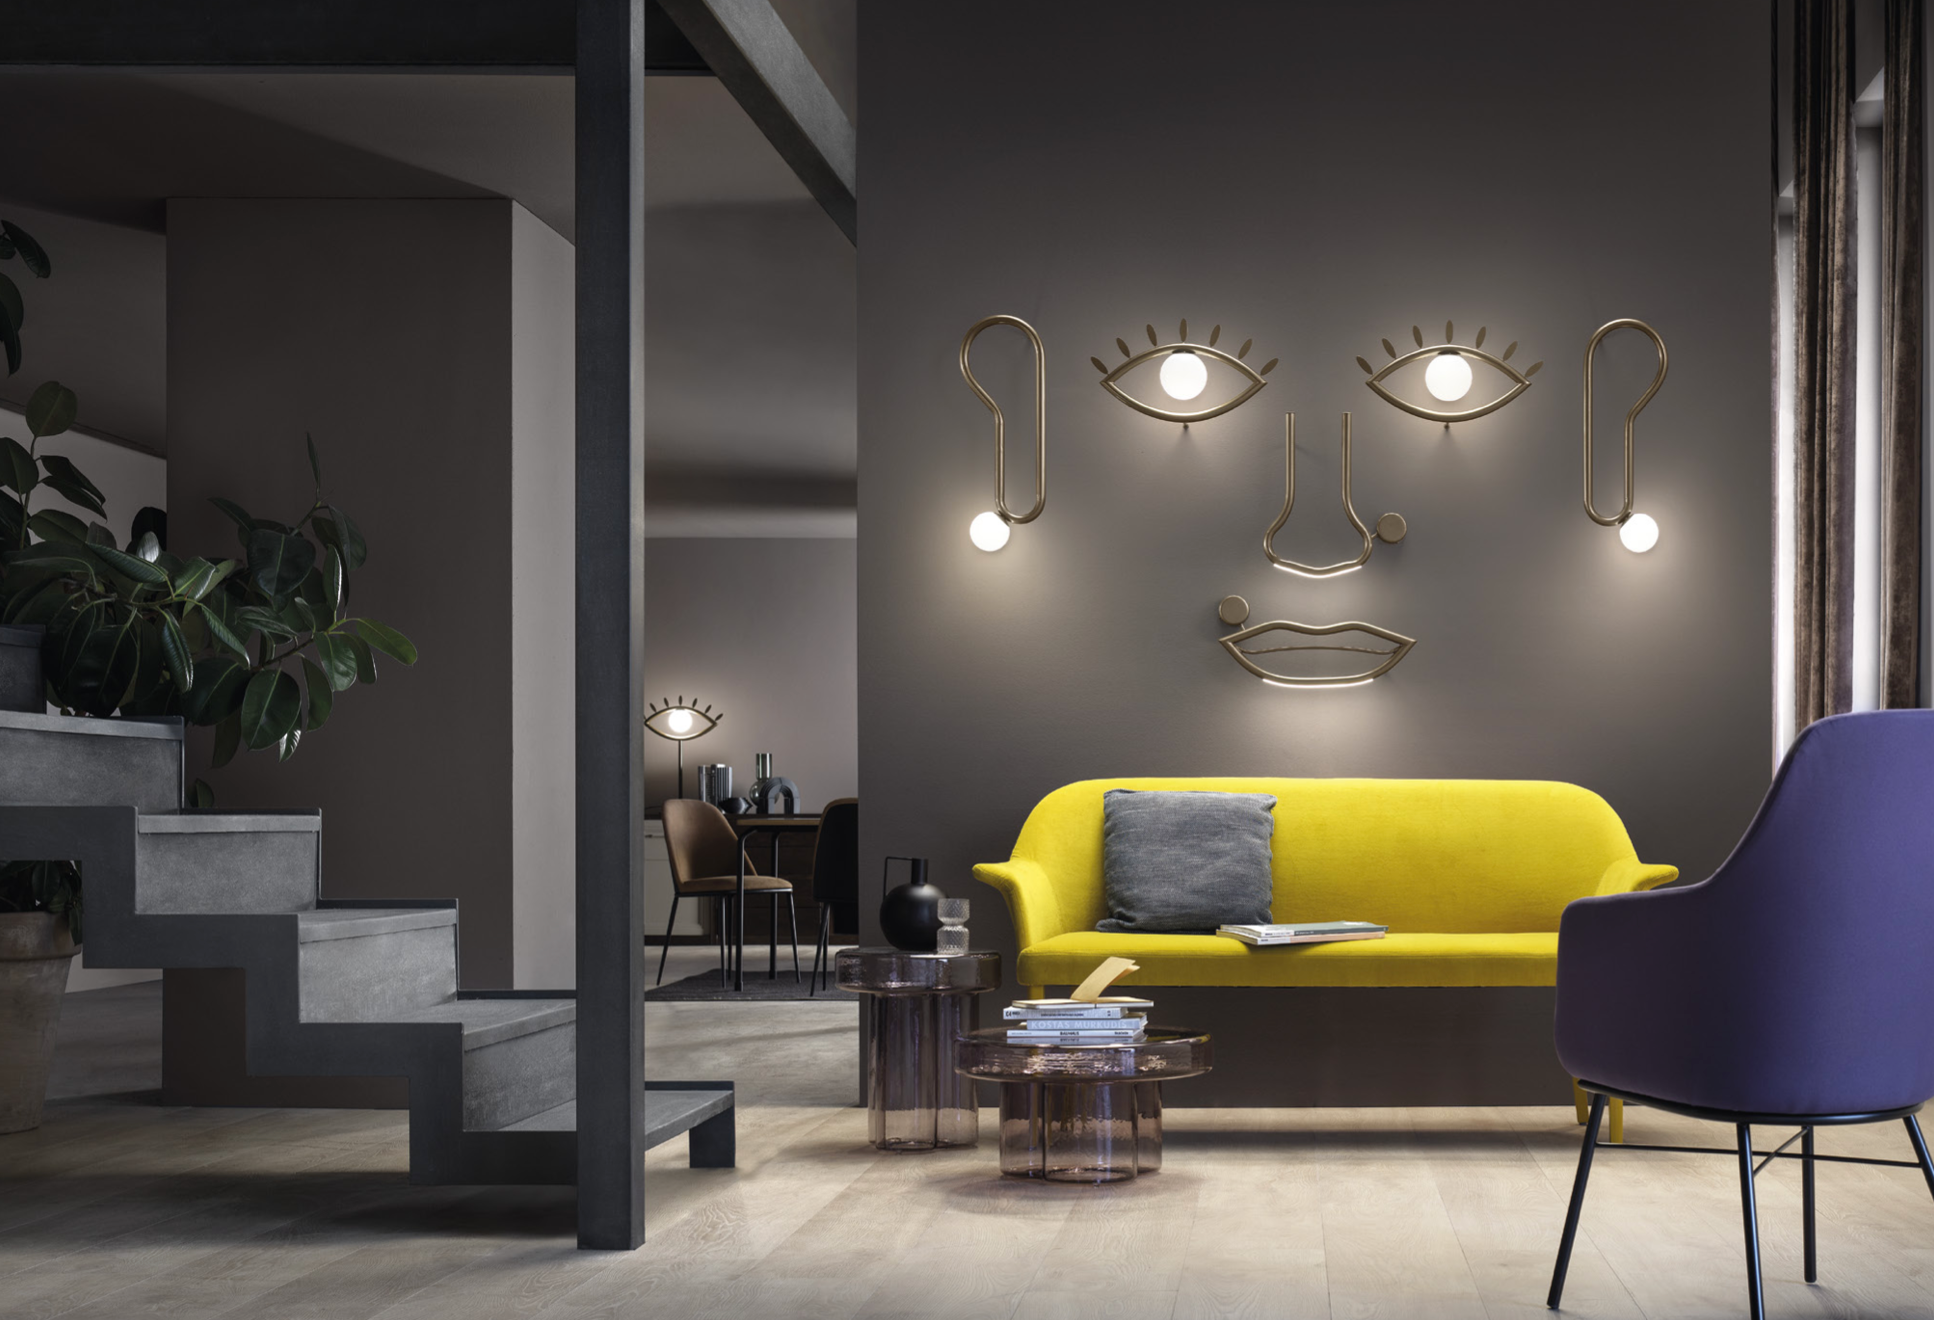 Visio Lights from Masiero in a luxury Living Room Interior. Available at Spacio India